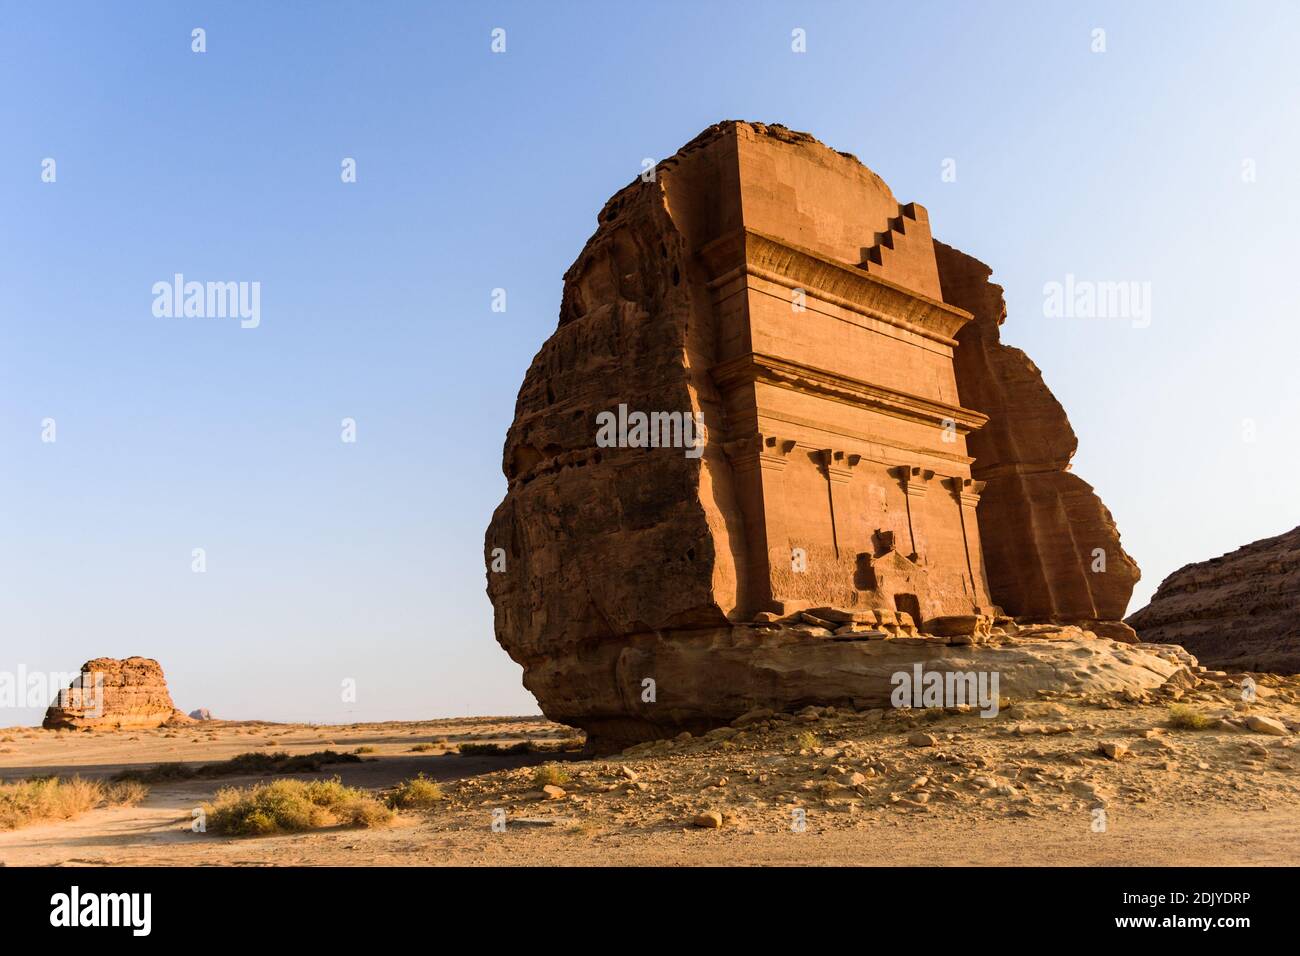 File photo - The archeological site of Al Hijr, near Madain Salih, also  known as Hegra is a World Heritage Site in Saudi Arabia. It consists of a  necropolis built by the